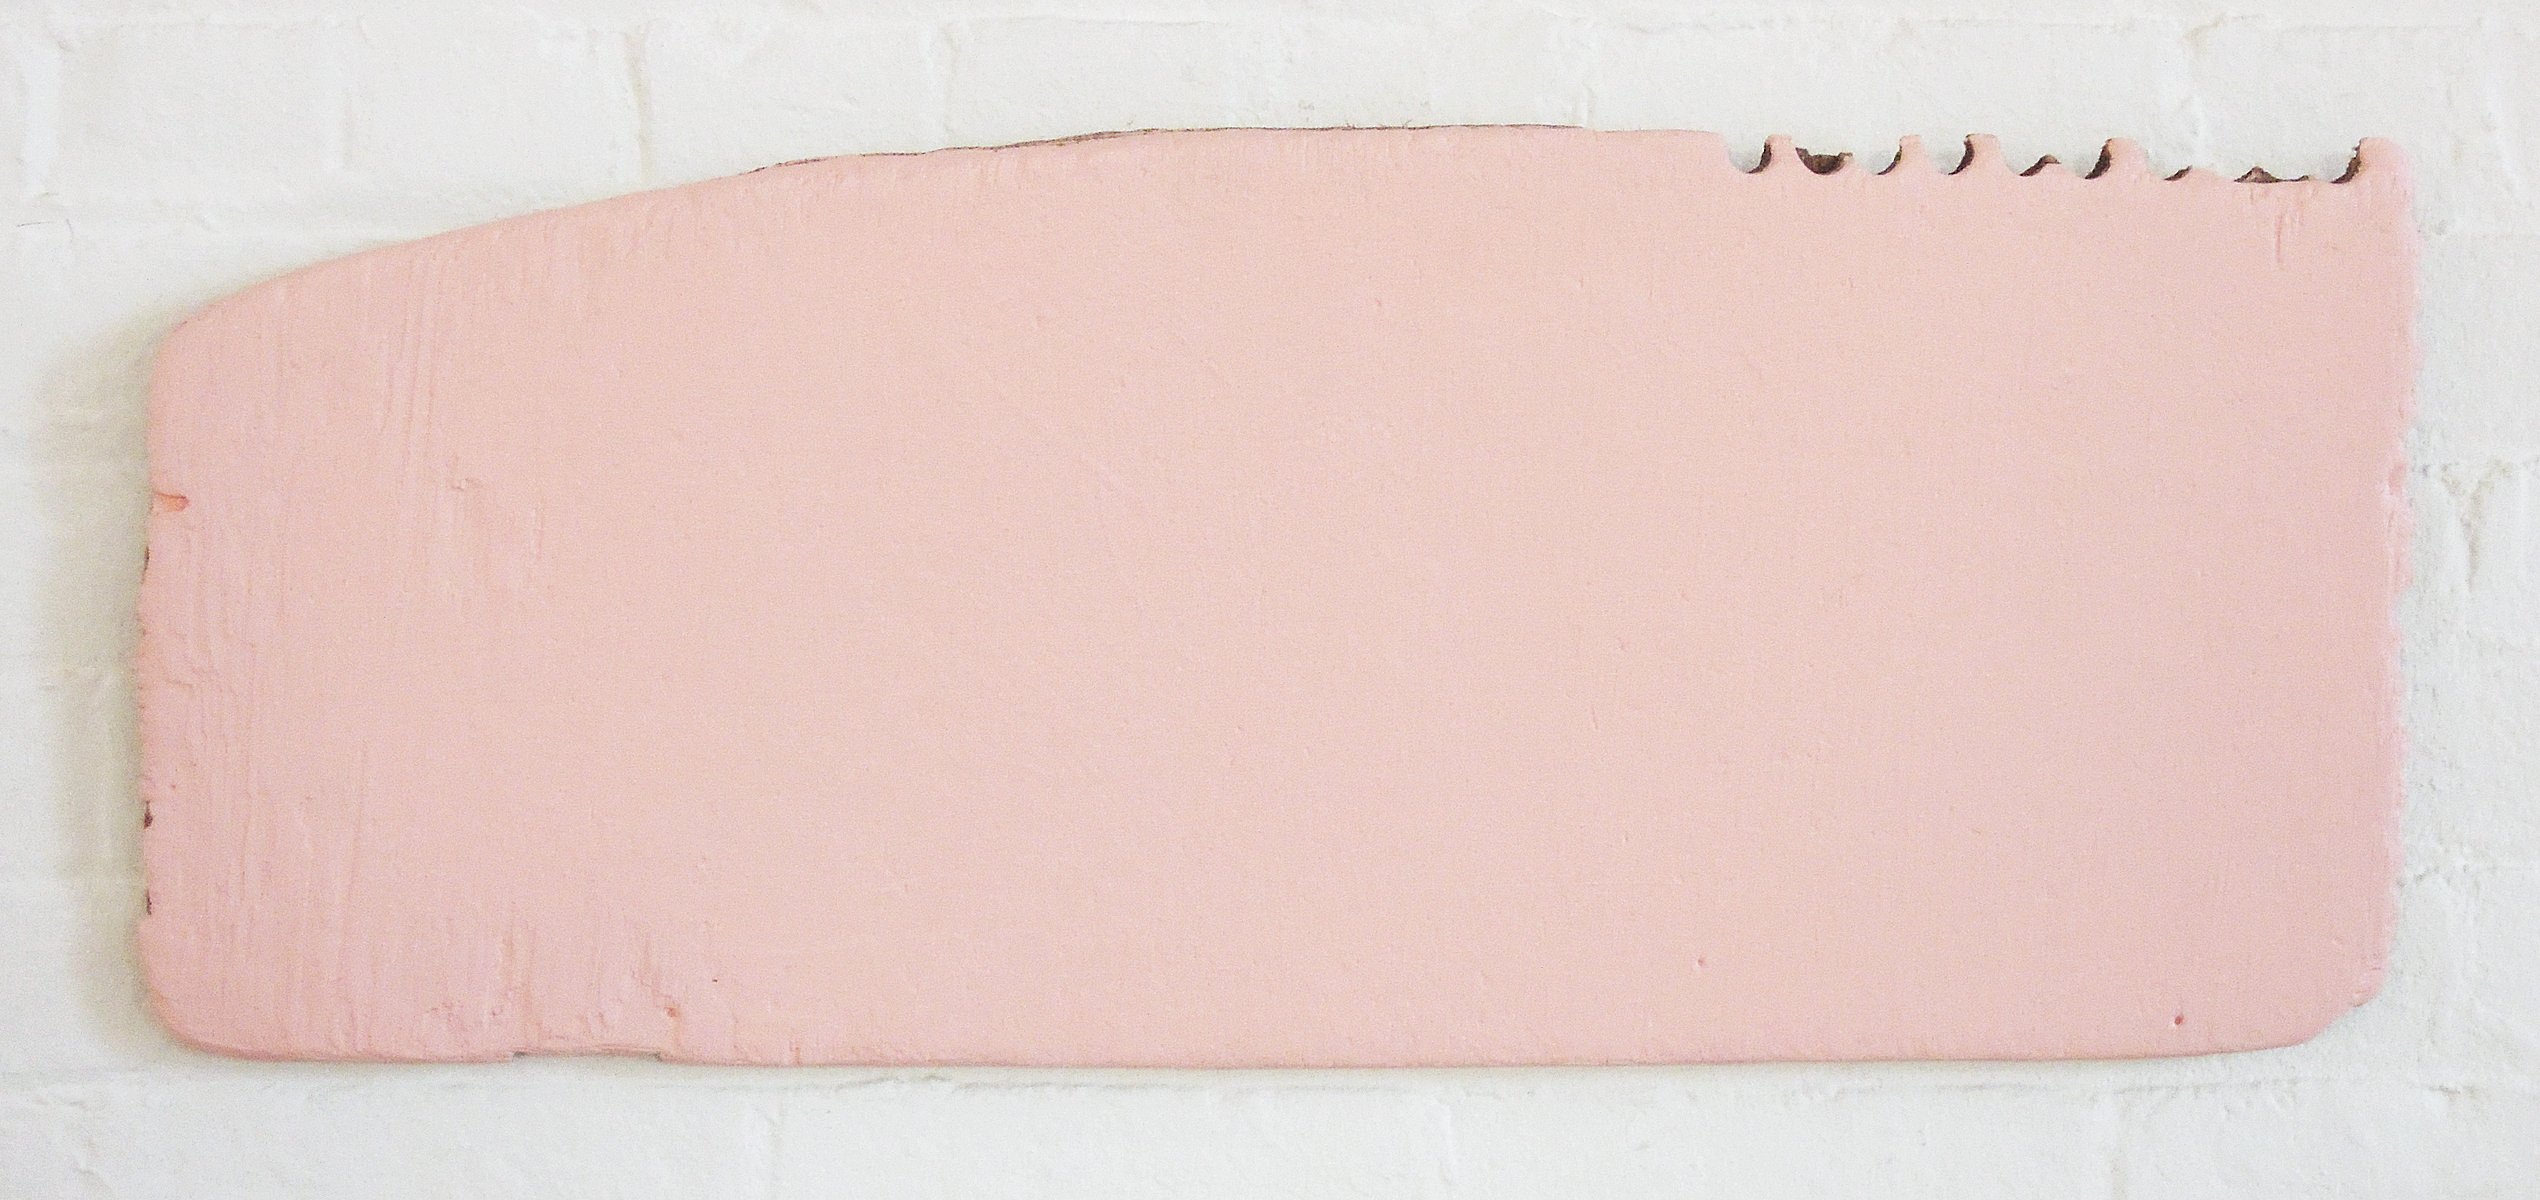 An irregularly shaped piece of plywood completely covered in pink paint.